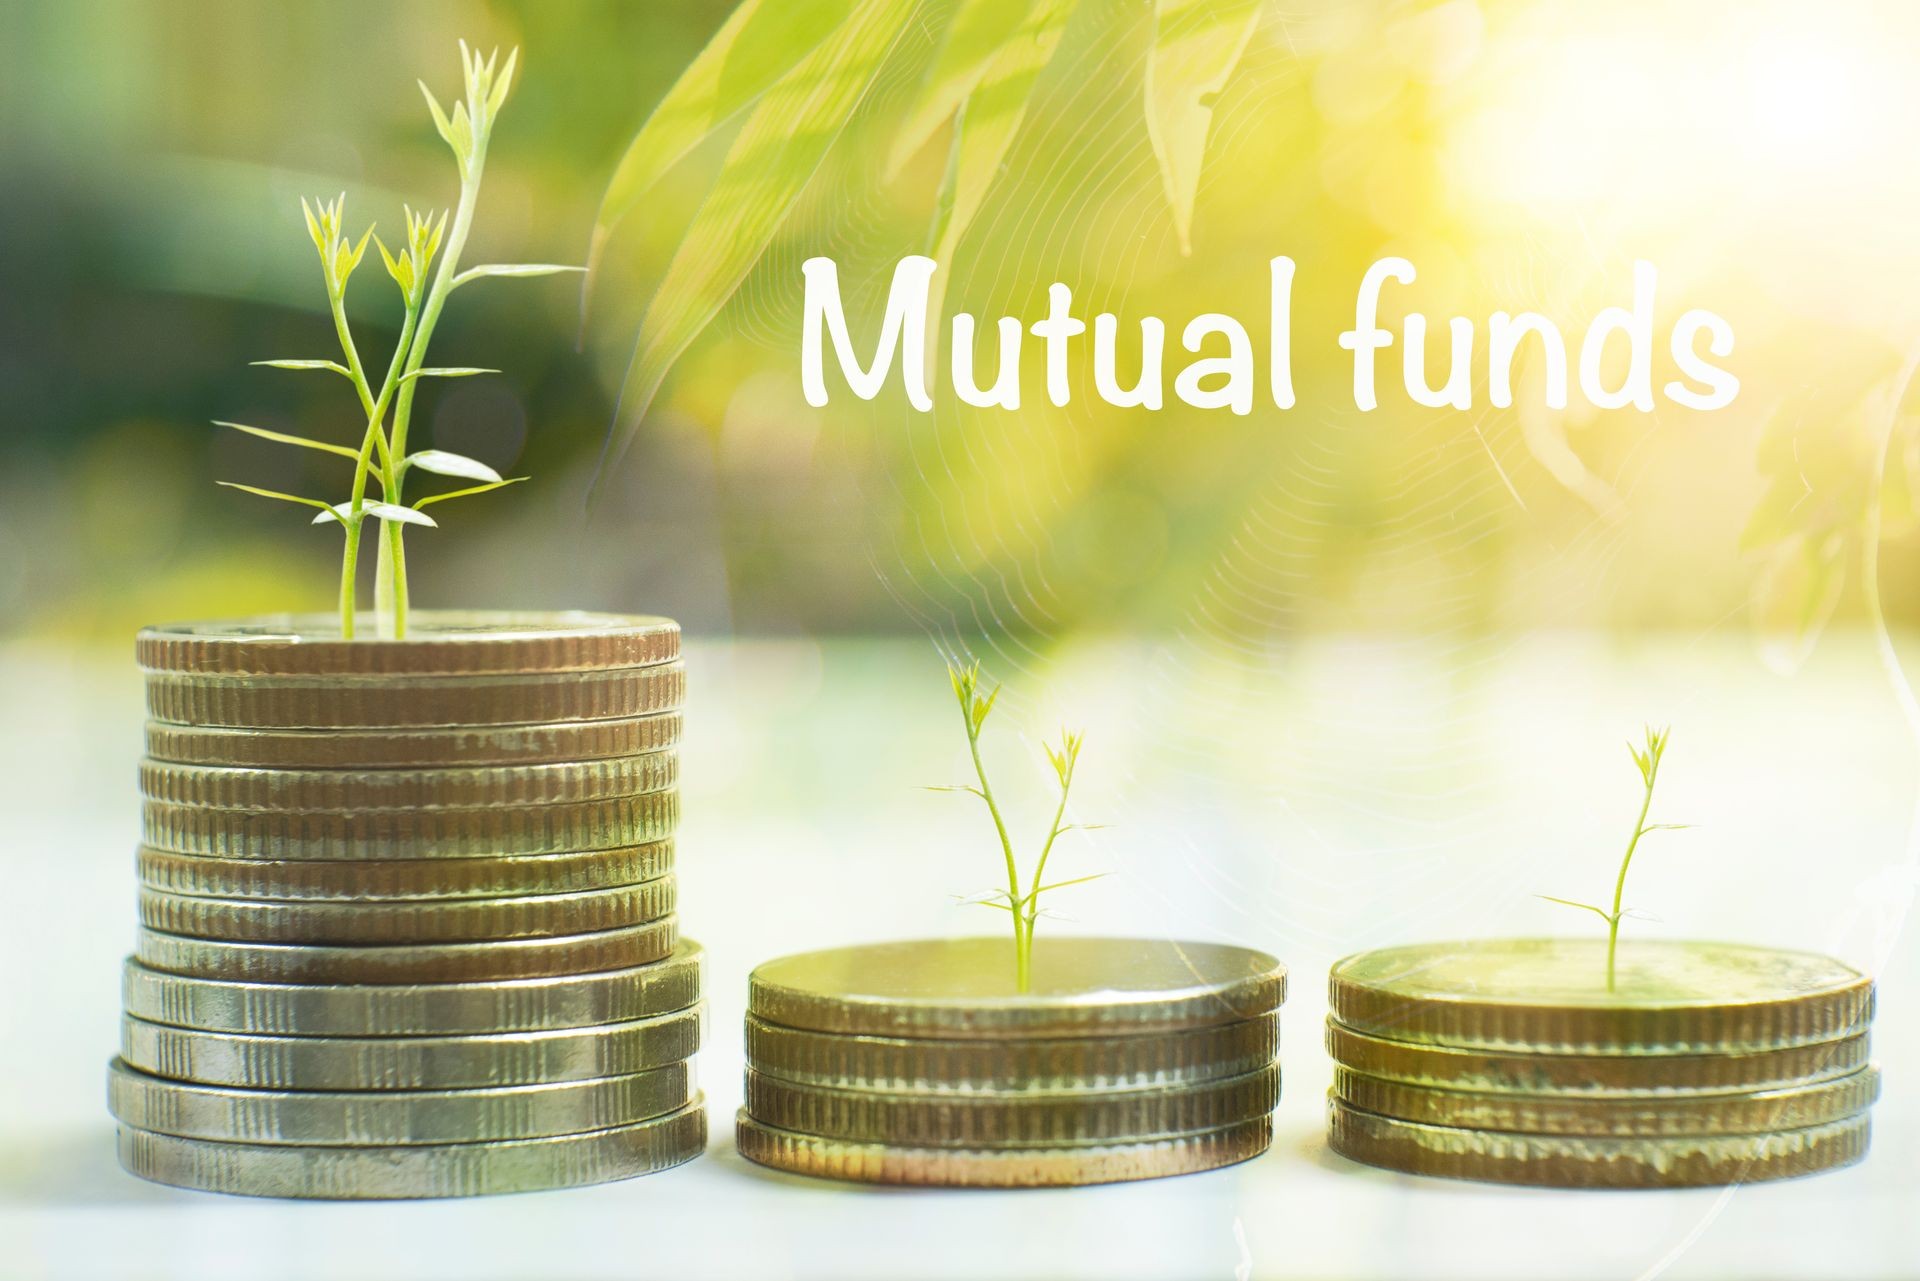 Coin with trees in mutual funds concept.